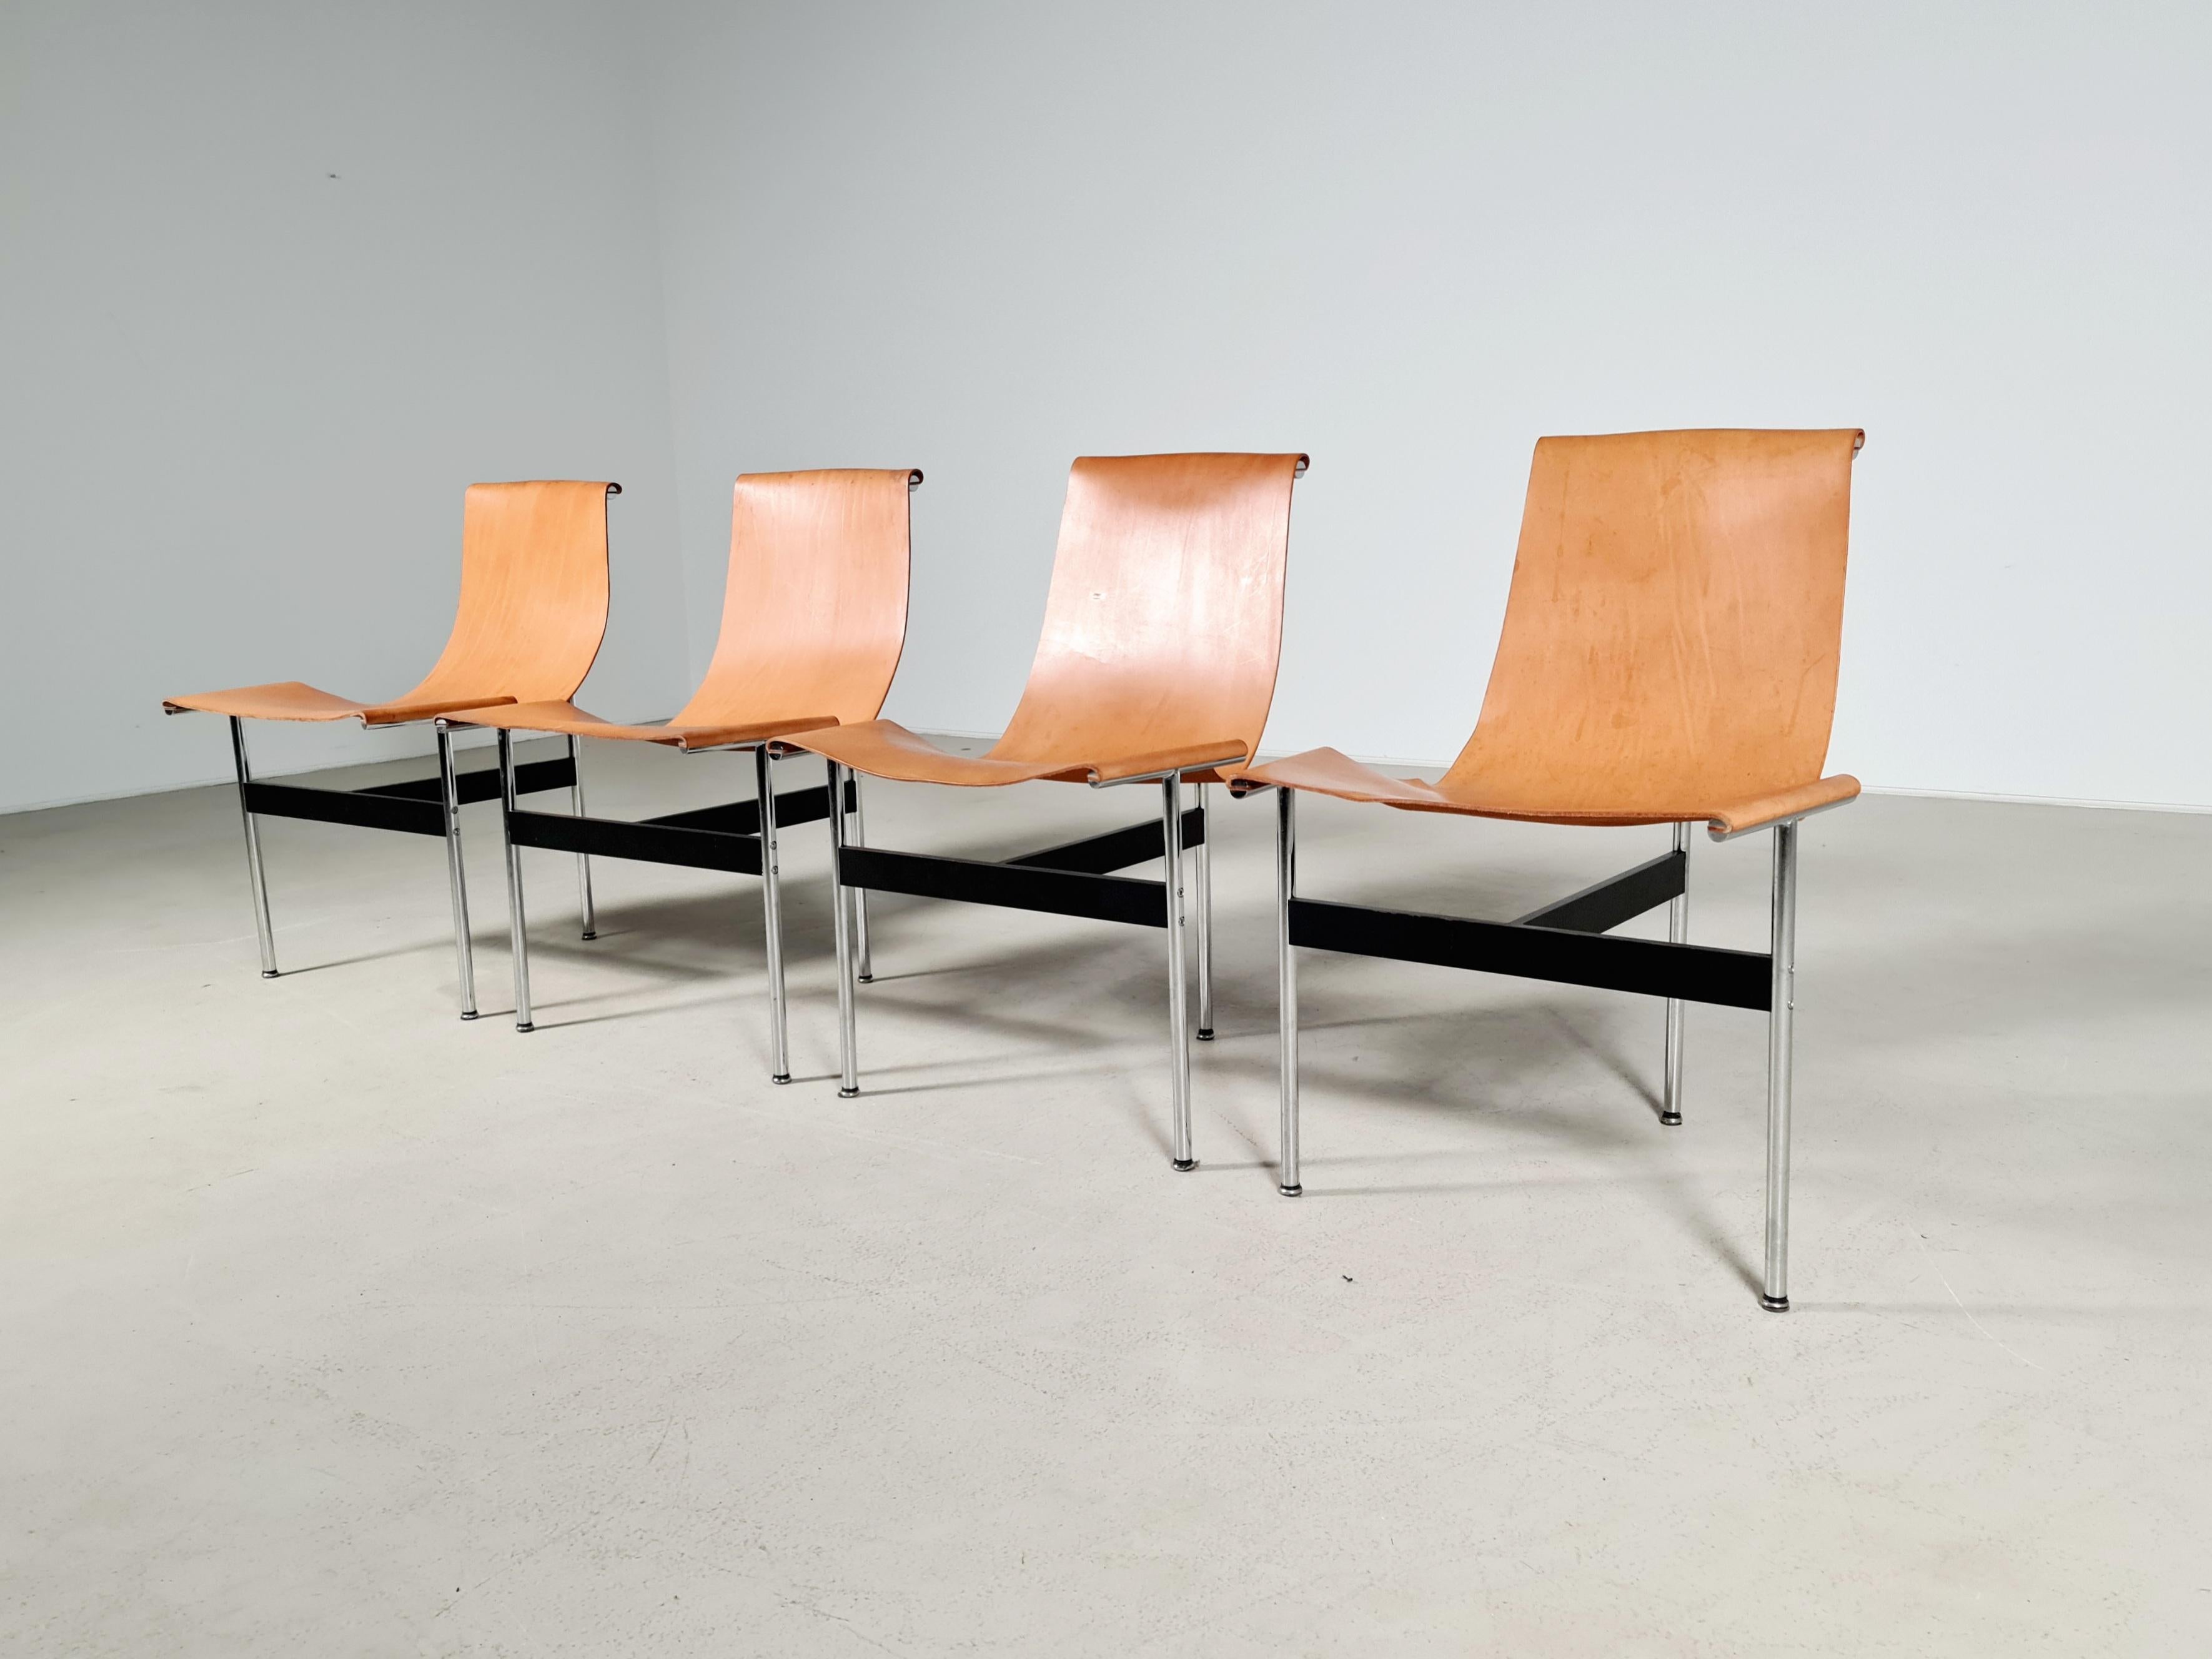 European T-Chairs by Katavolos, Littell and Kelley for ICF Padova, 1960s